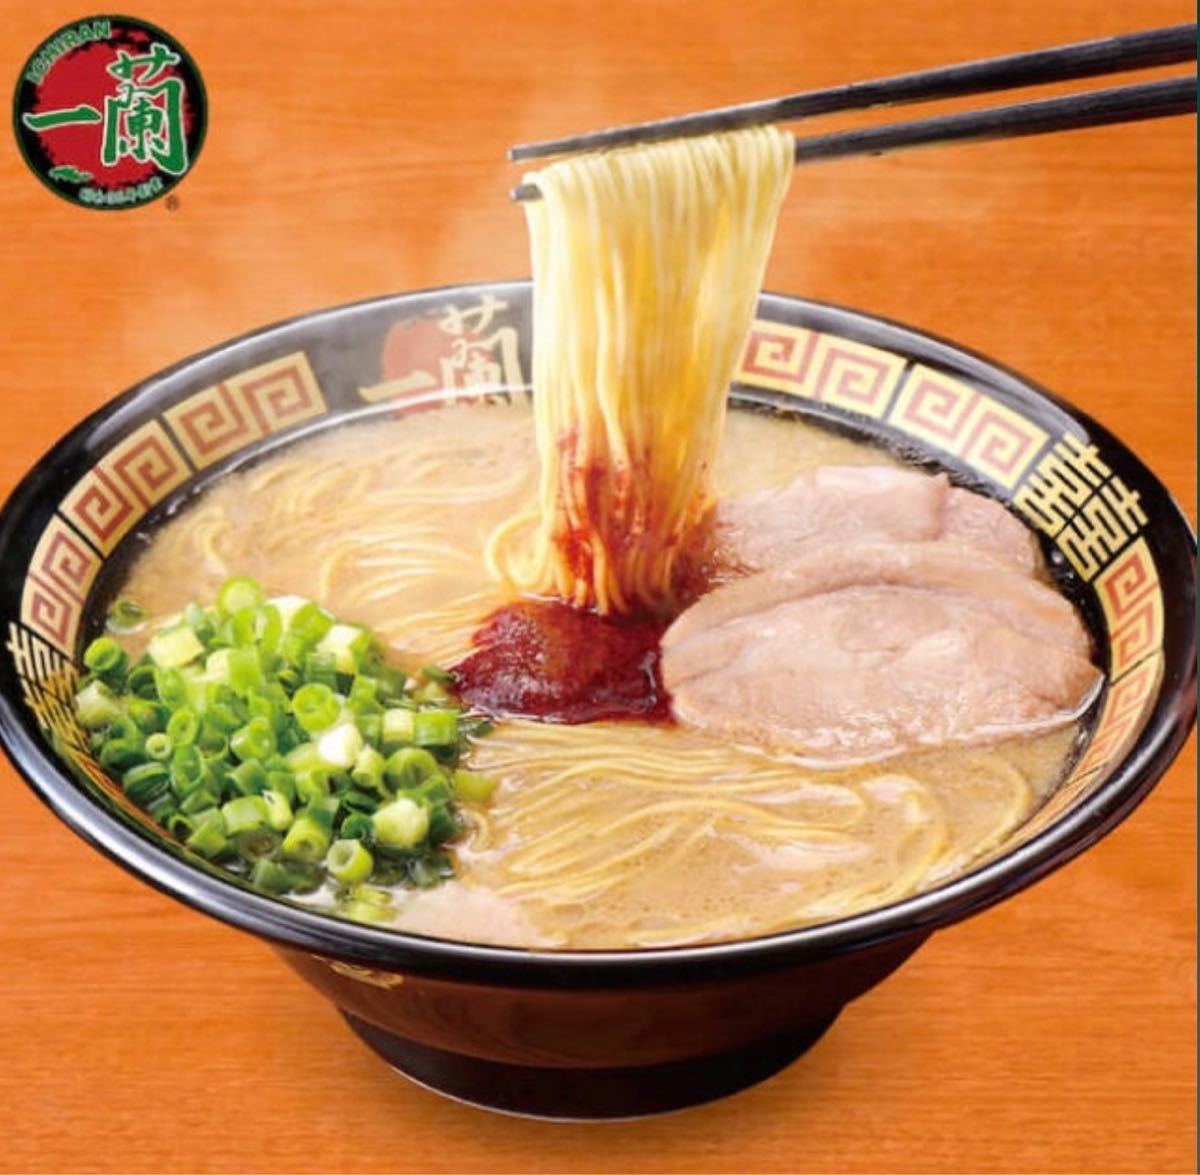  one orchid ramen 1 cup regular price 980 jpy coupon (8/31 time limit ) URL notification free coupon #8